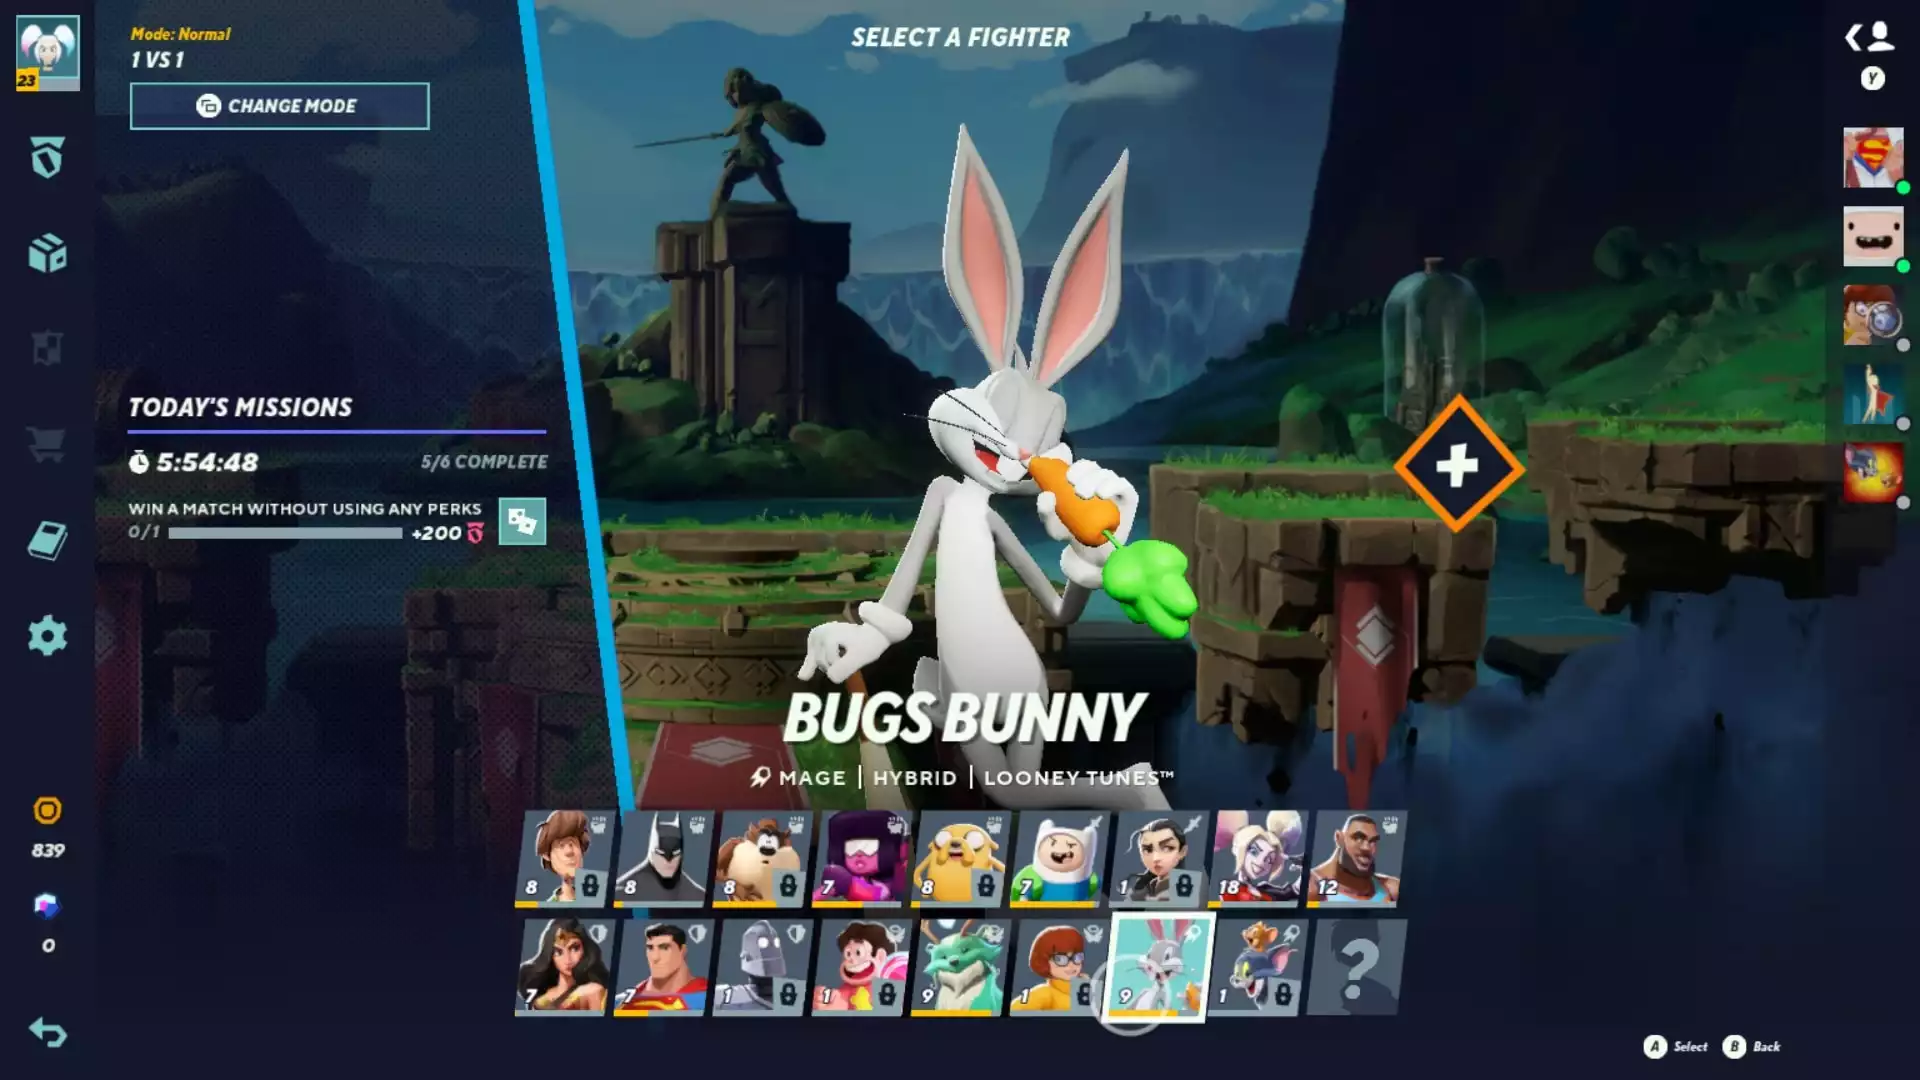 MultiVersus Bugs Bunny Guide: Combos, Perks, Specials, And More